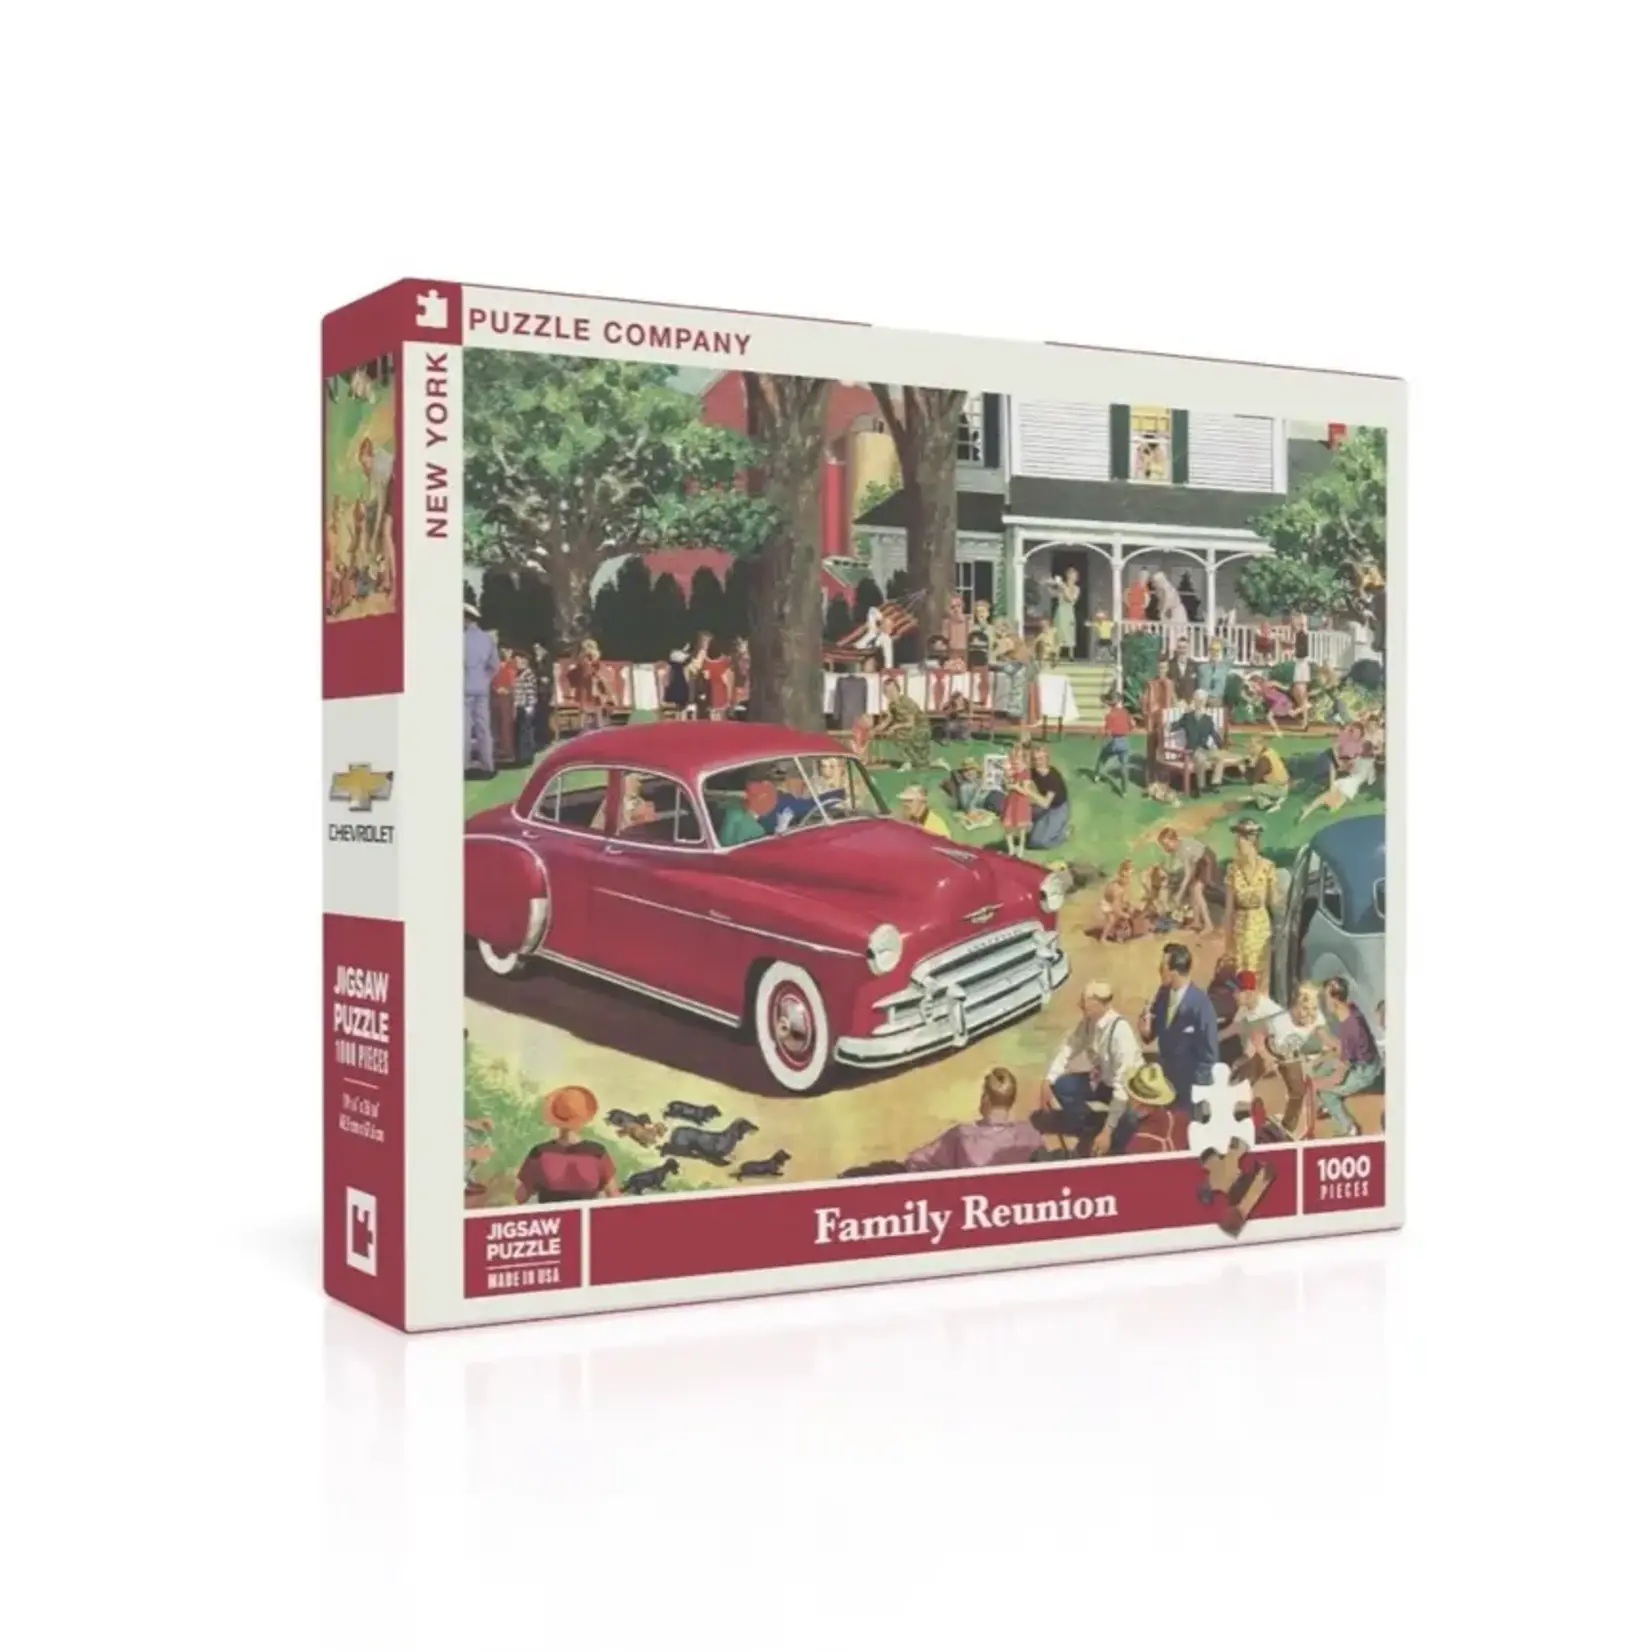 New York Puzzle Company Family Reunion - 1000 Piece Puzzle